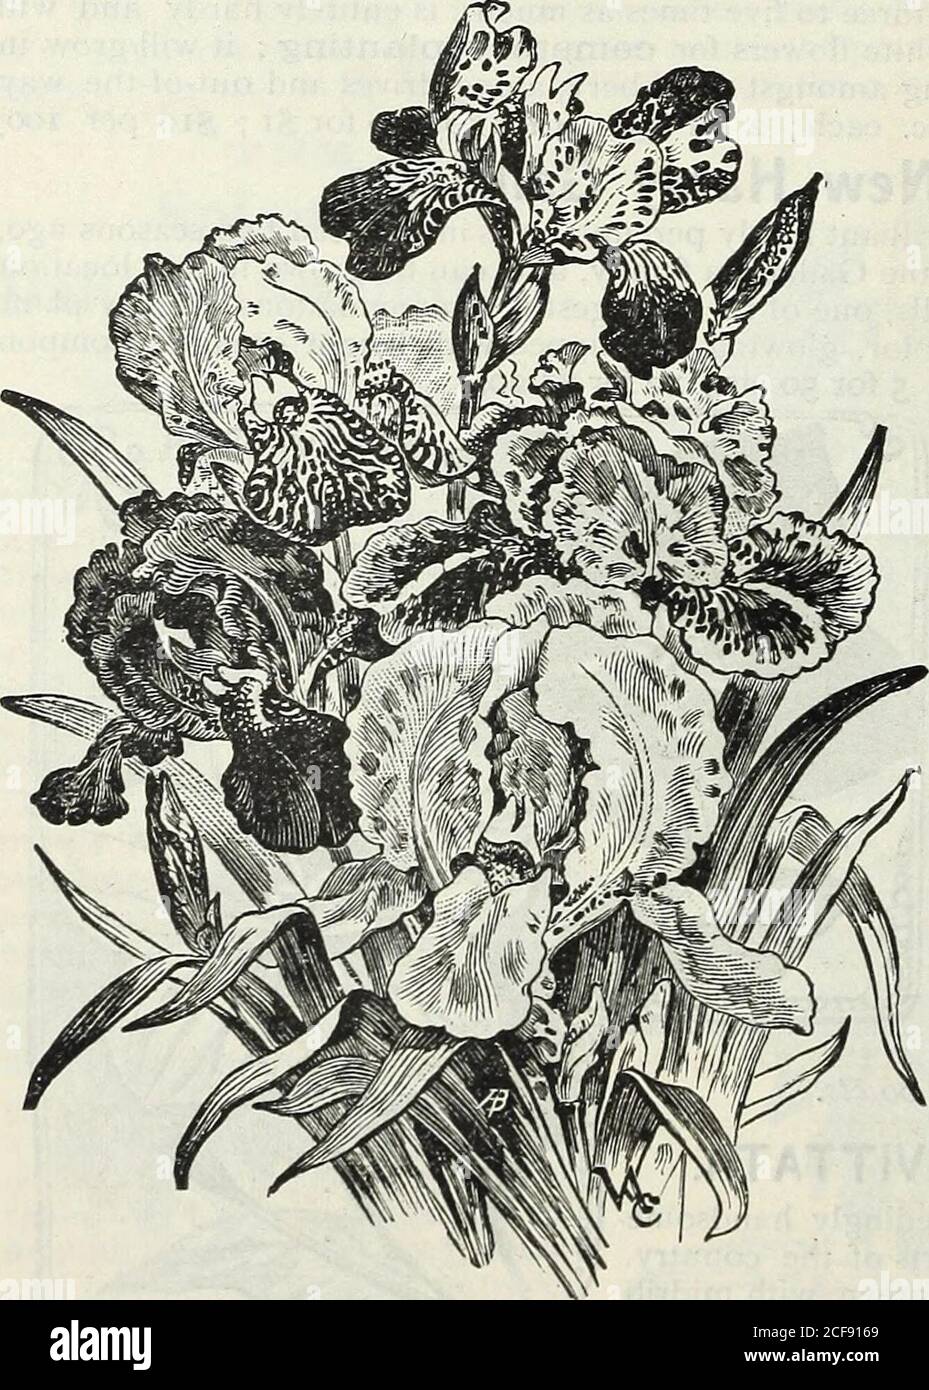 . Our new guide to rose culture : 1891. PHLOX, STAR OF LYON. 20 CTS.. A GROUP OF GERMAN IRIS. Qerman Jris. We have a fine collection of German Iris.They are a splendid class of hardy Perennials, need-ing no protection in Winter and unsurpassed for thelawn or shrubbery borders. The clumps growrapidly and present a neat, cheerful and brightappearance. Our illustration shows the flowers,which are of superb beauty; the fragrance is de-lightful—a rich spicy odor, and adds much to theattractiveness of these handsome plants.Atroviolacea. — Large bold flowers, brilliantreddish purple, with light yello Stock Photo